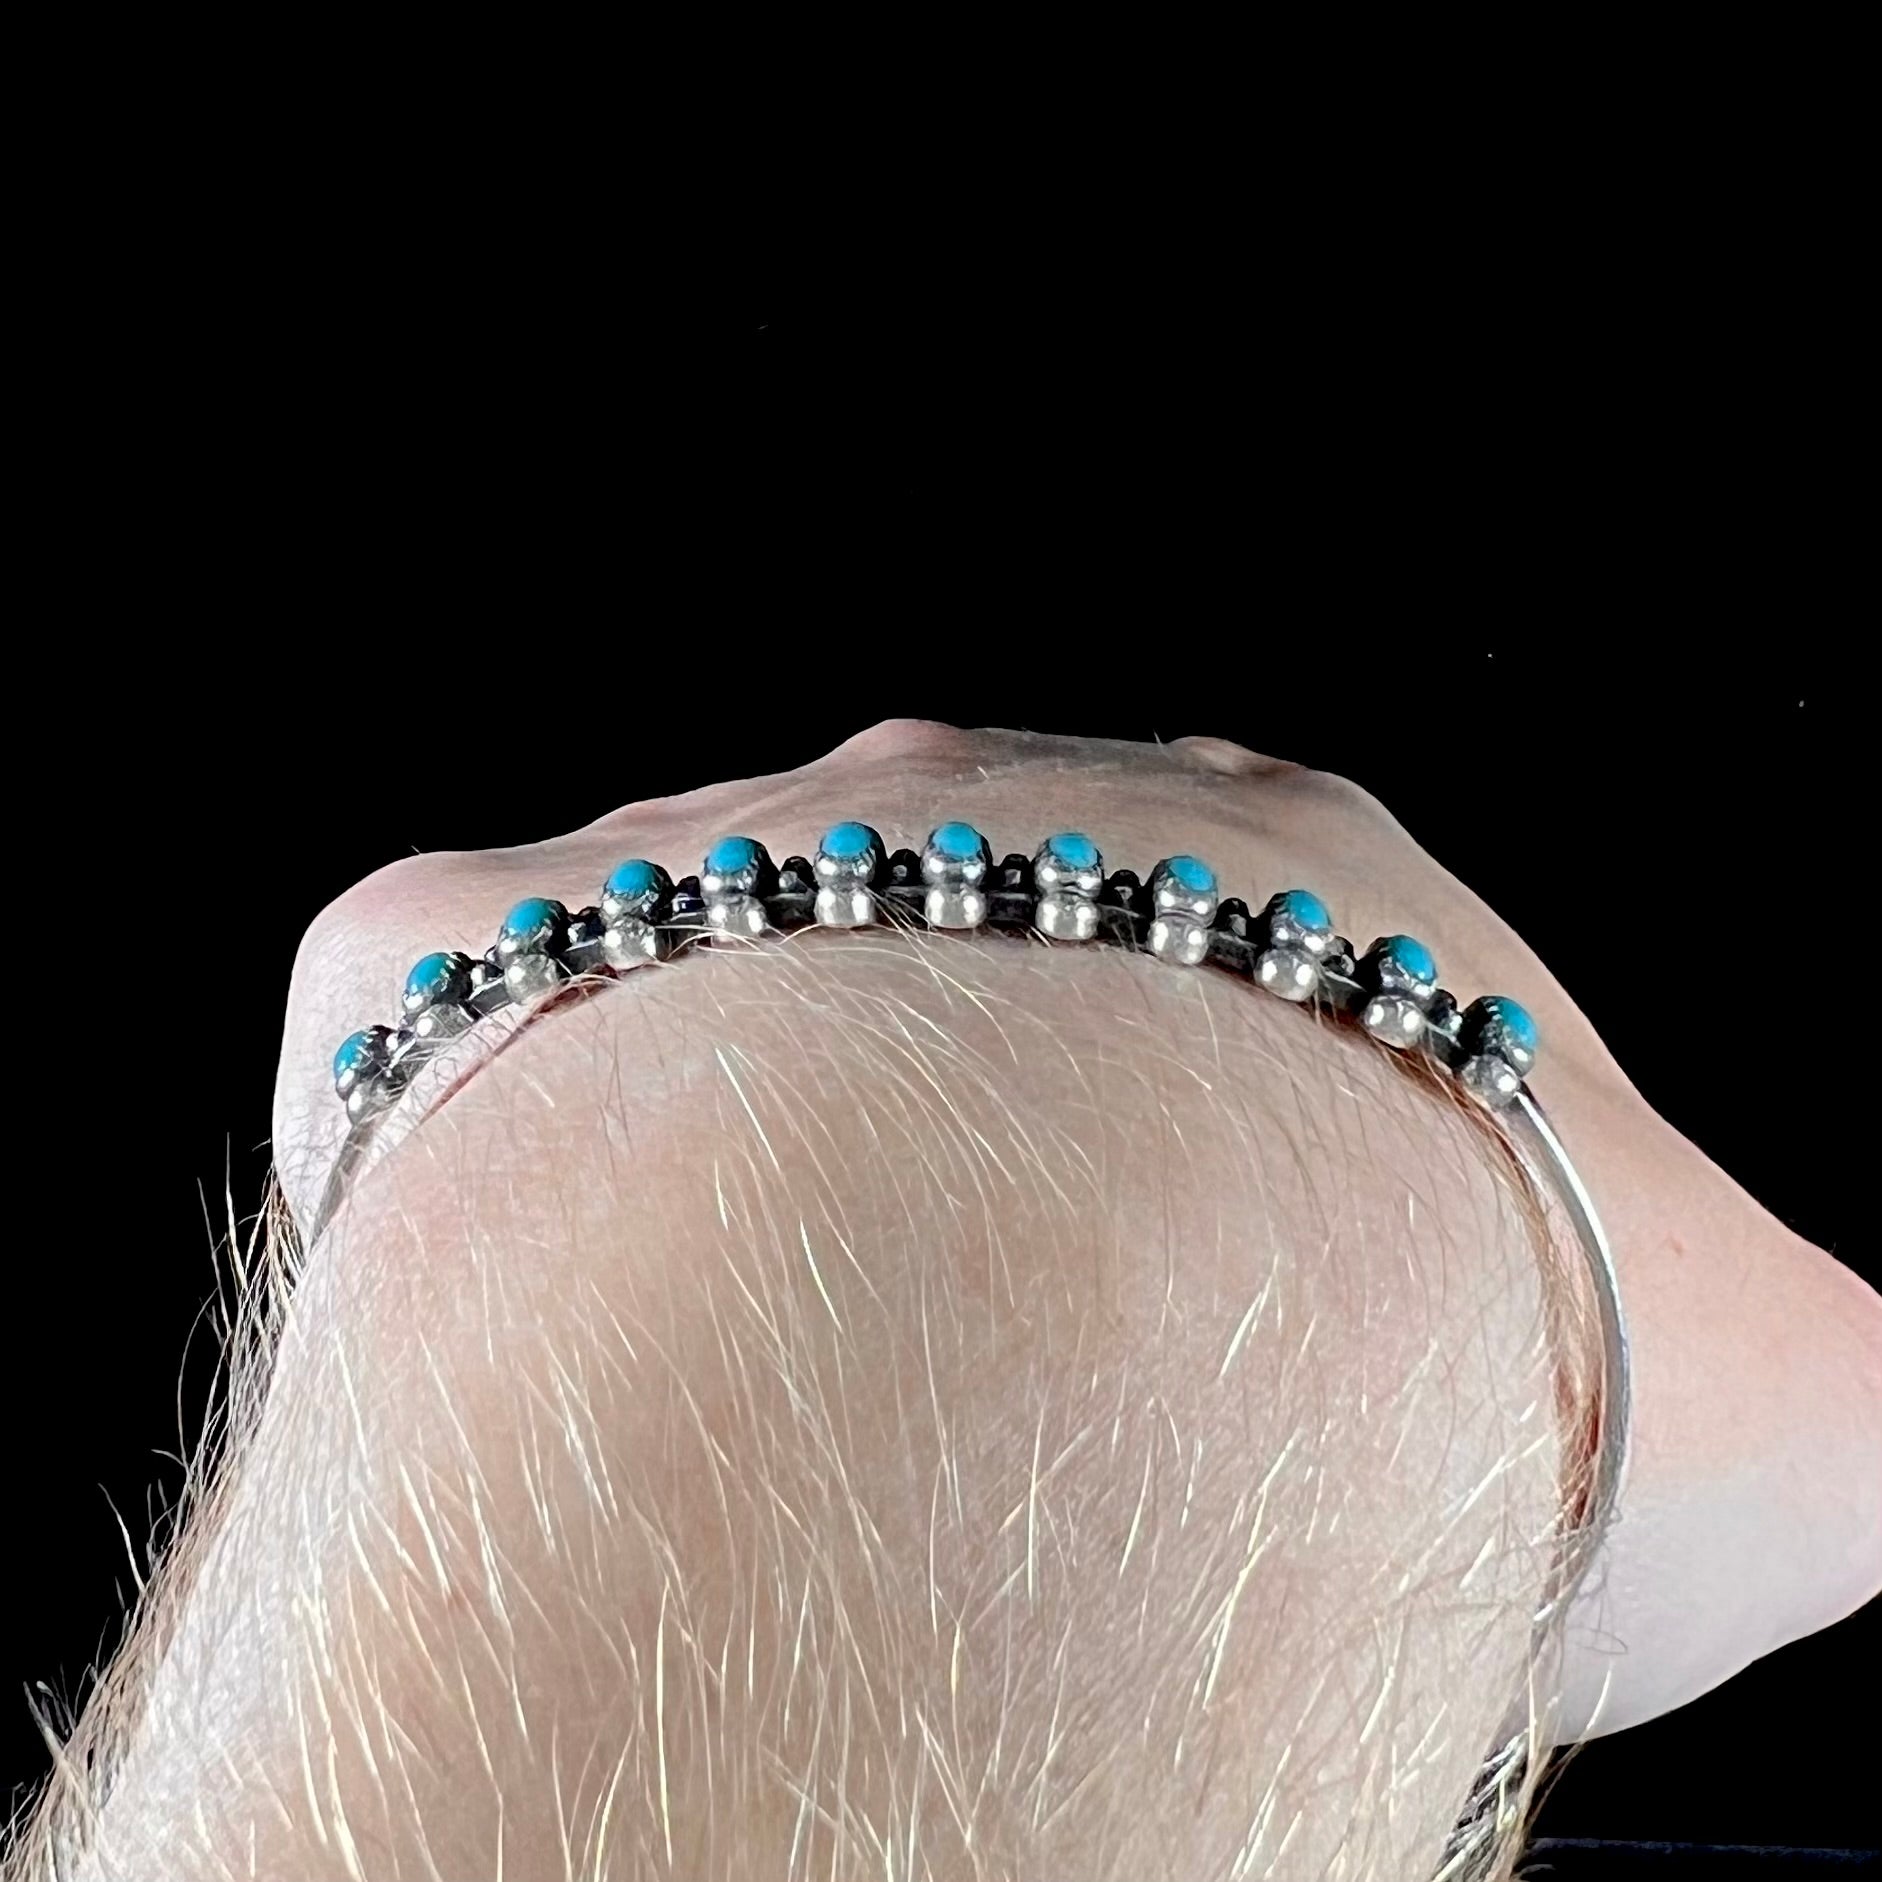 A ladies' sterling silver Zuni Indian turquoise cuff bracelet.  The stones are oval cut Sleeping Beauty turquoise.